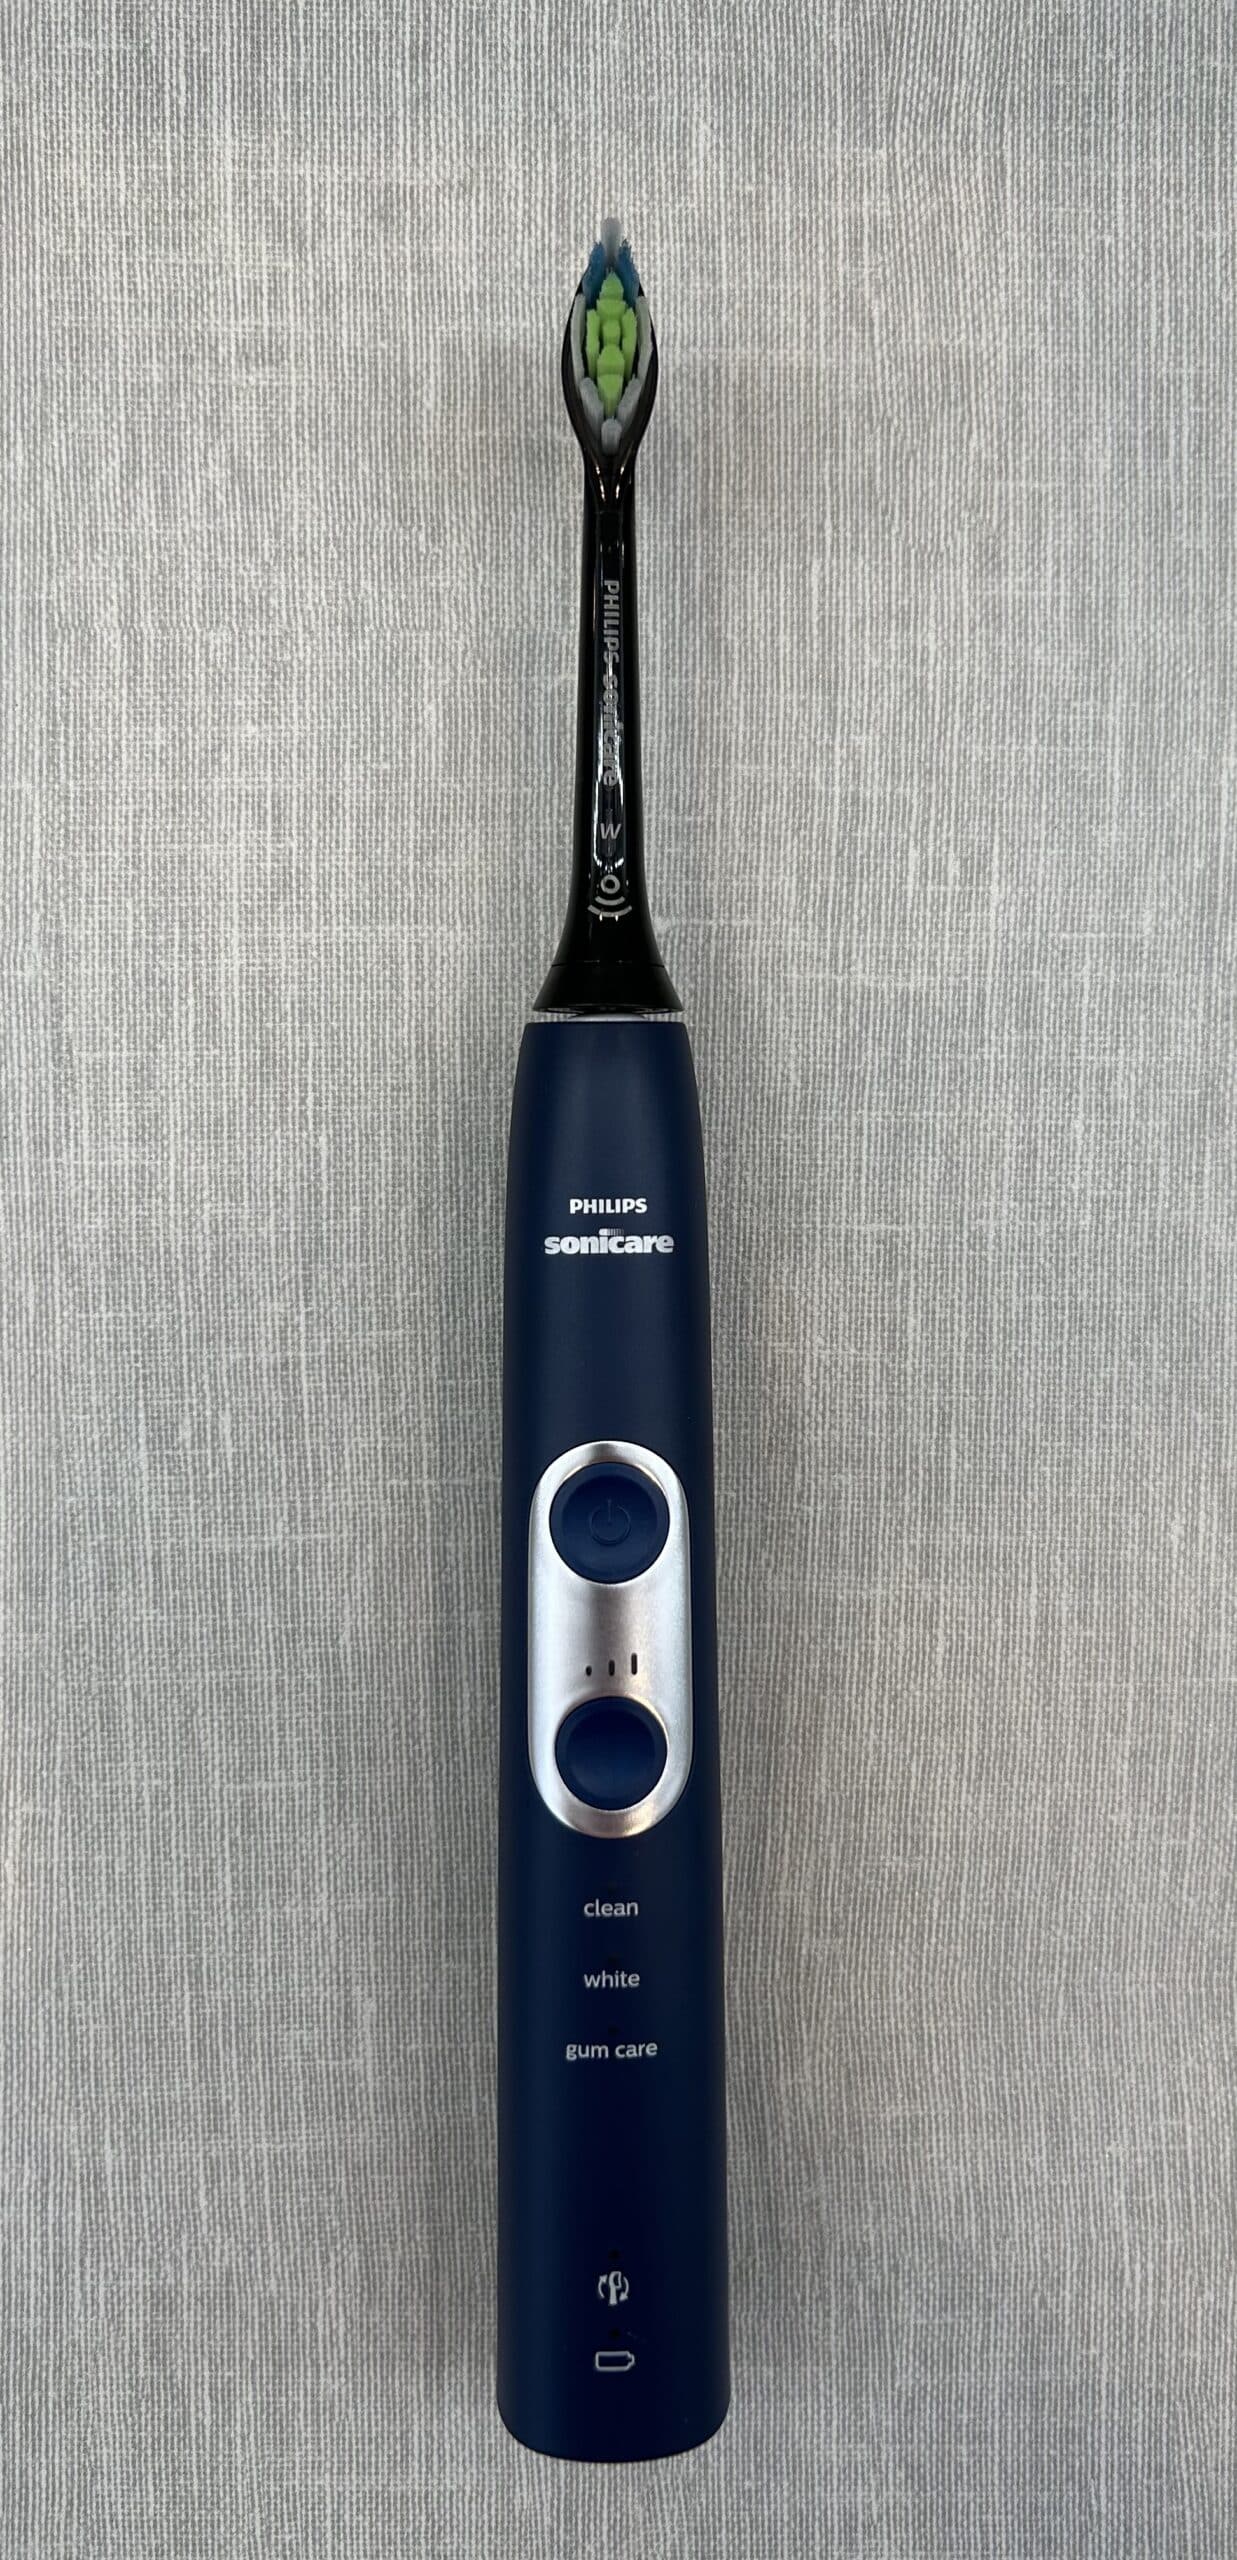 Philips Sonicare 6500 Electric Toothbrush Review | My Dental Advocate